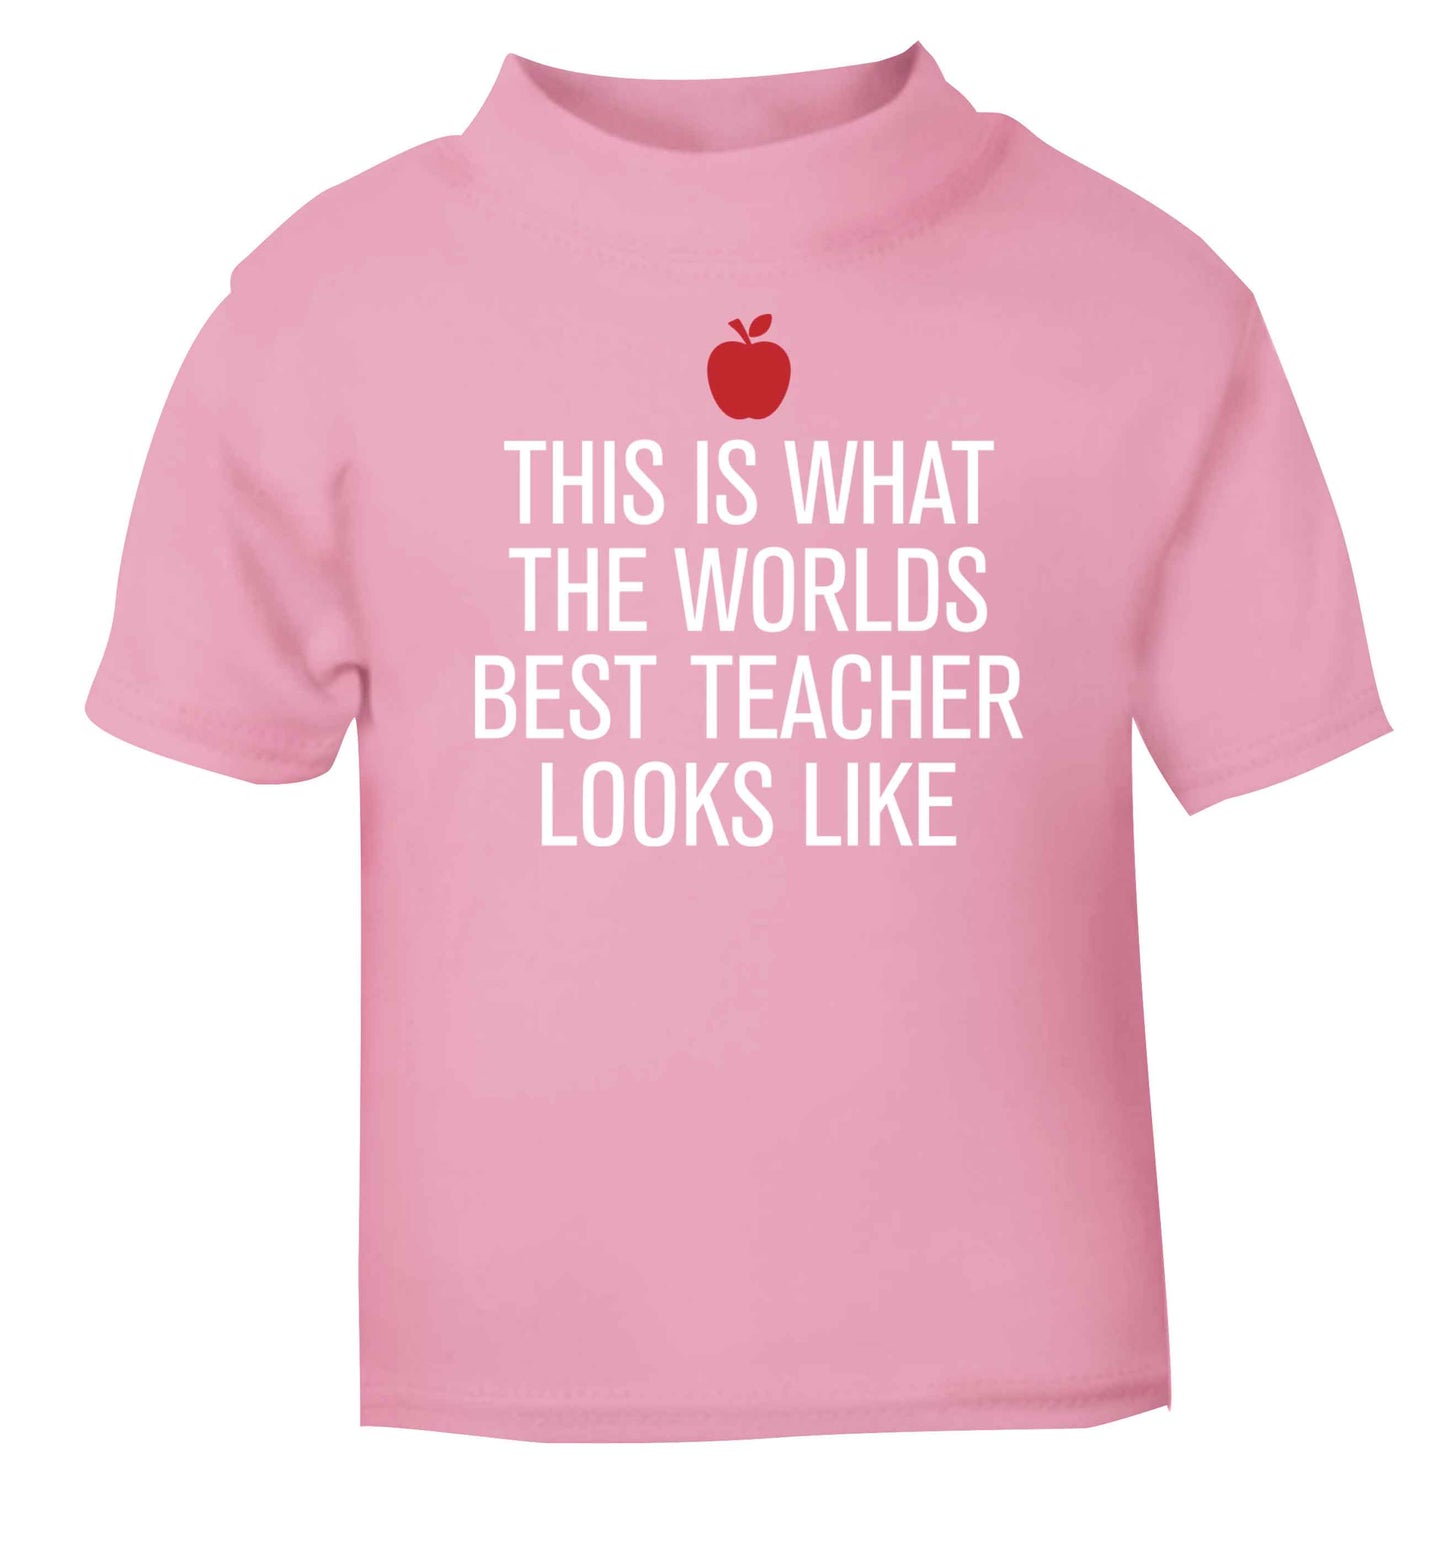 This is what the worlds best teacher looks like light pink baby toddler Tshirt 2 Years